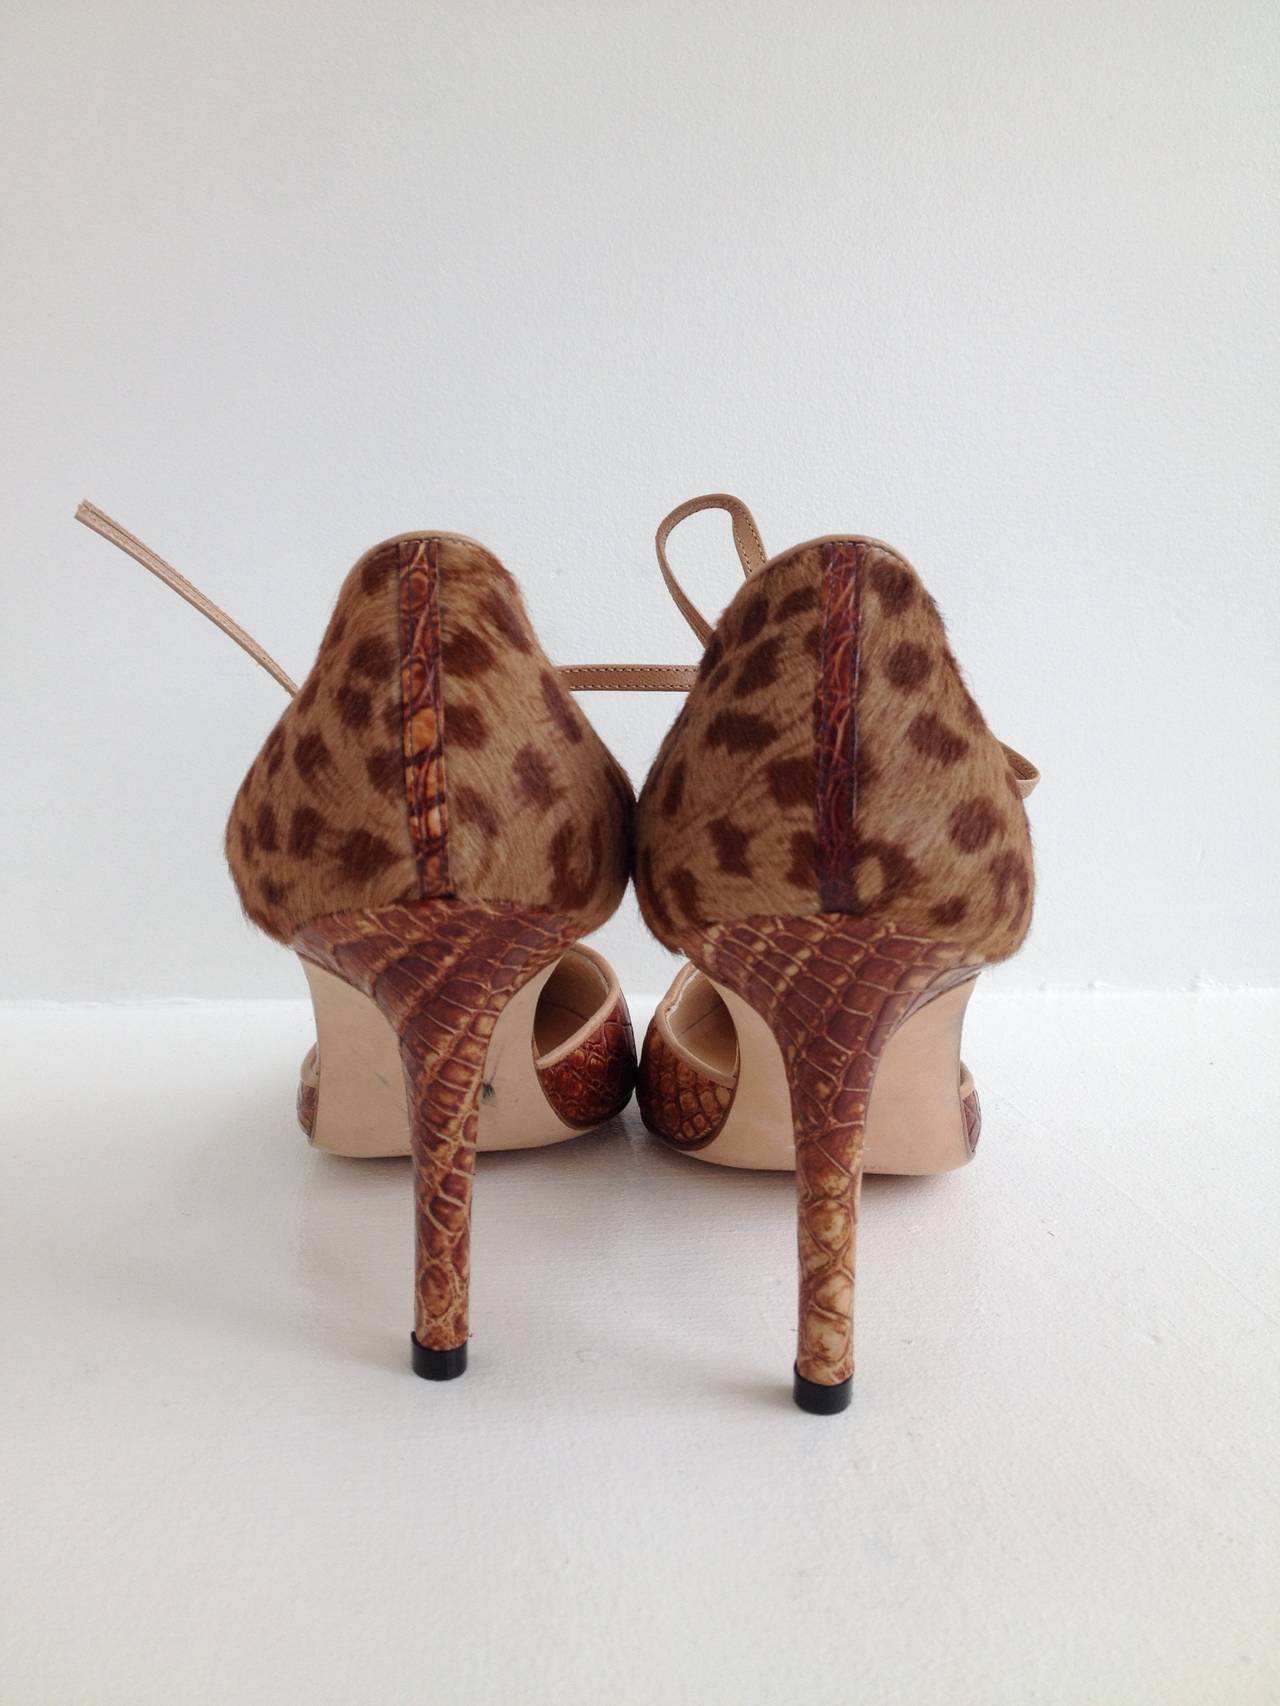 Animal madness! With a faux alligator toe and a leopard print pony hair heel, these Manolo Blahnik d'Orsay heels are fierce in so many ways. The toe comes to a sharp point, while the heel wraps around to tie at the ankle. The 3.25 inch stiletto is